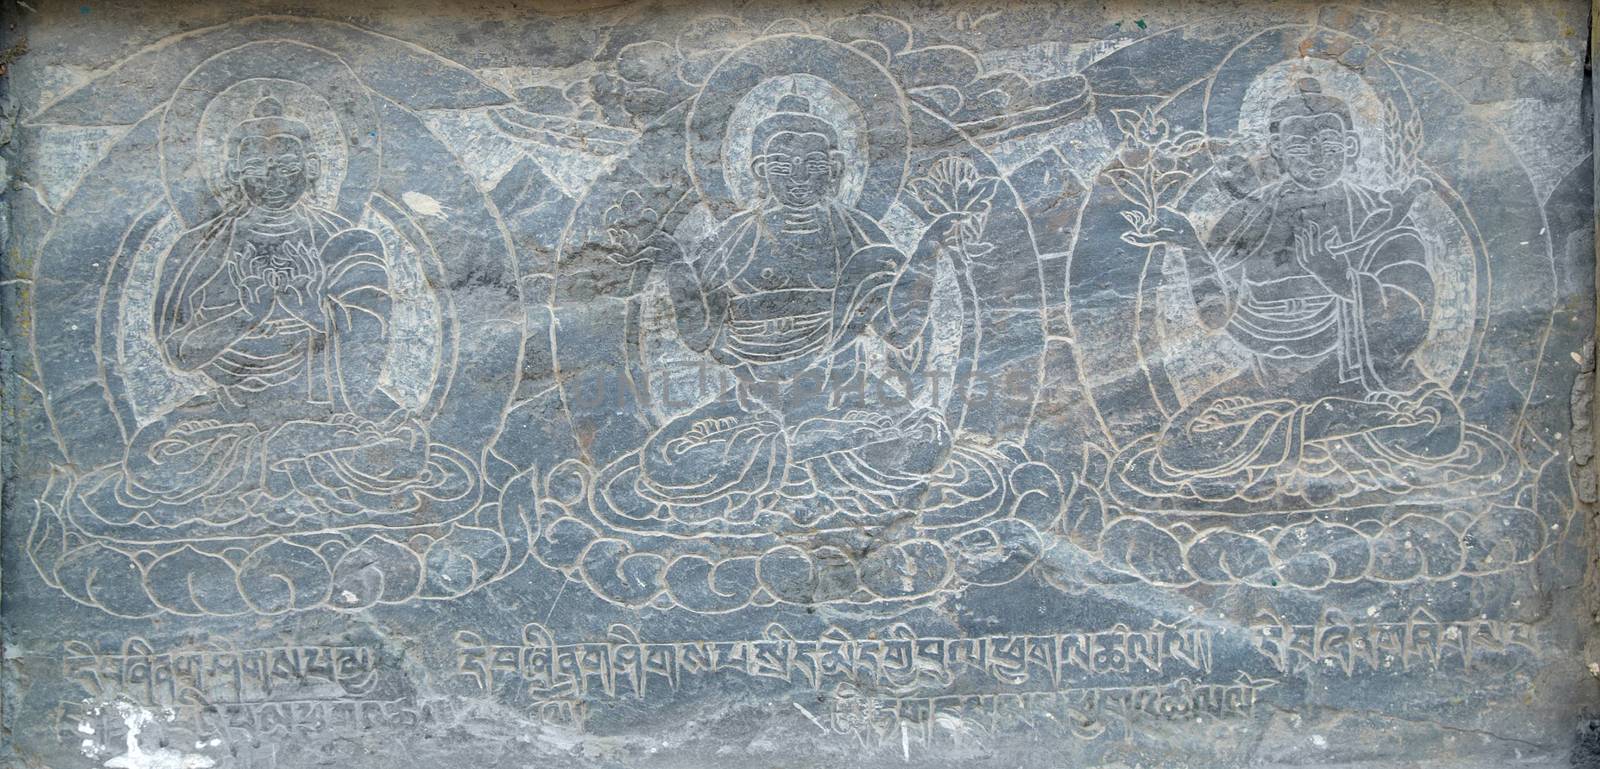 The buddhistic pictures engraved on the stone